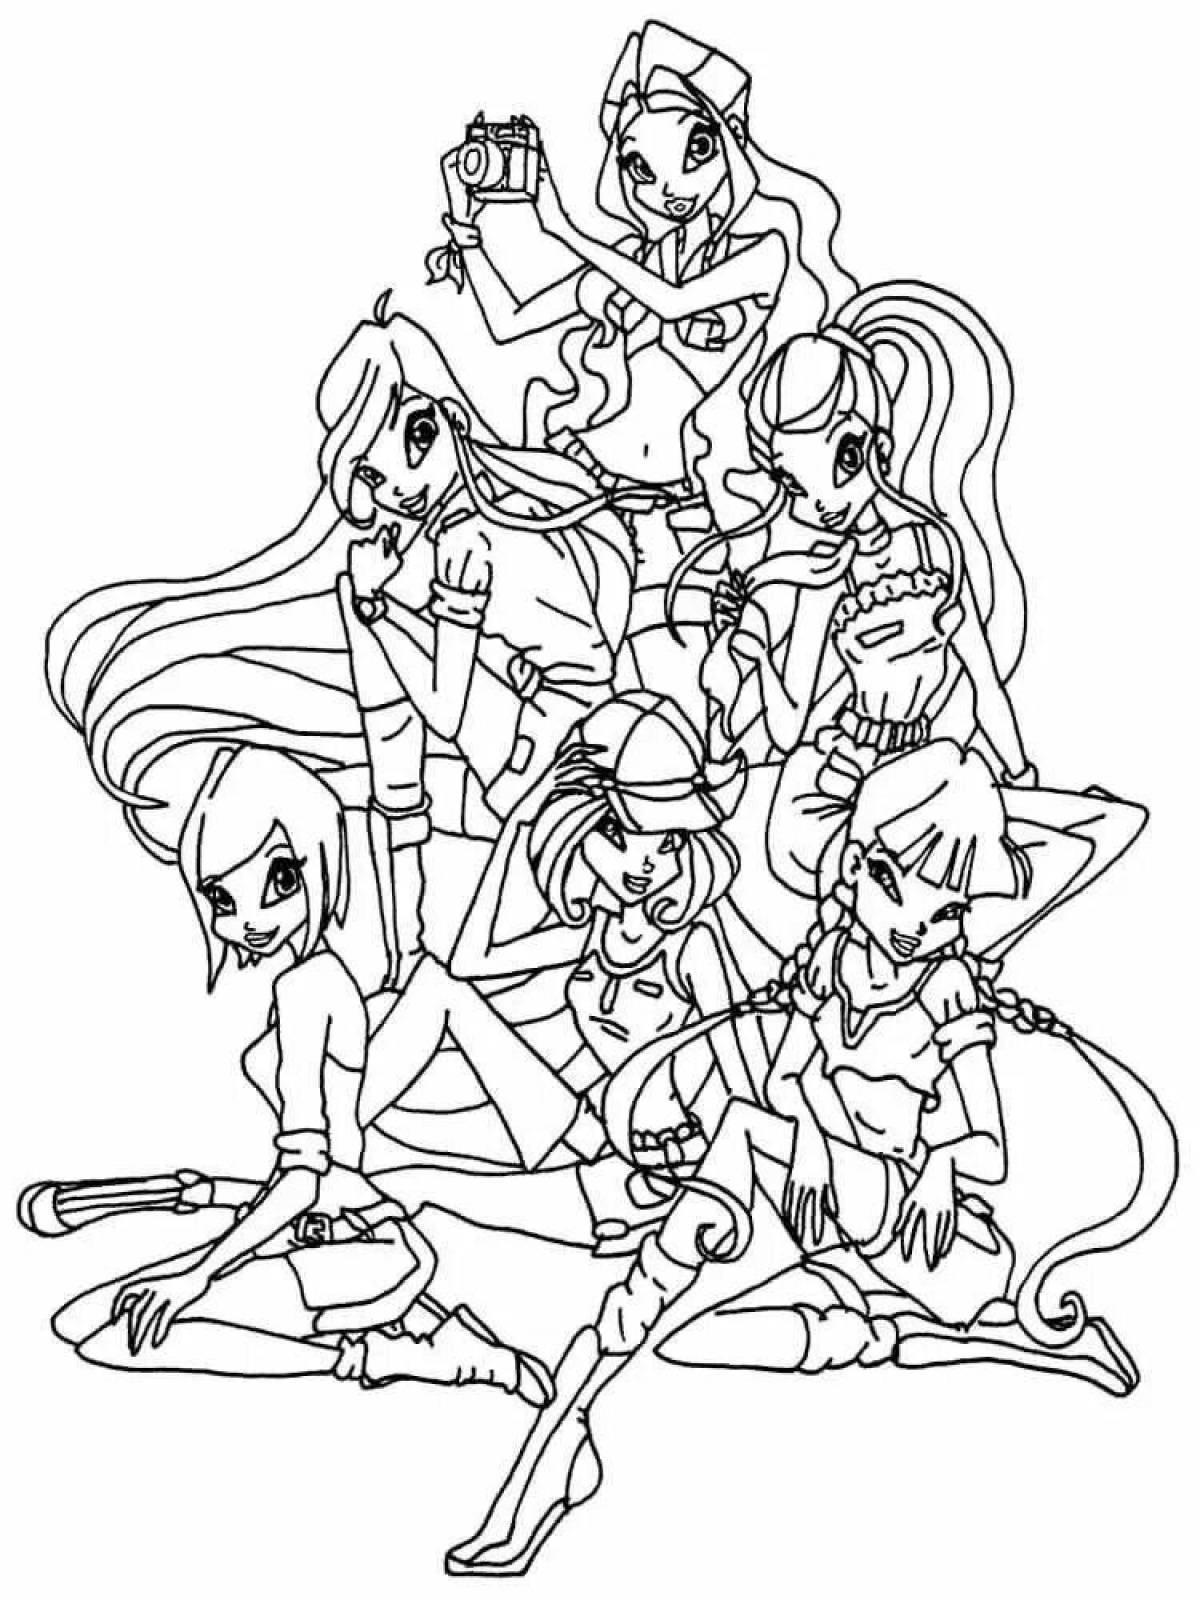 Radiant winx coloring pages for kids